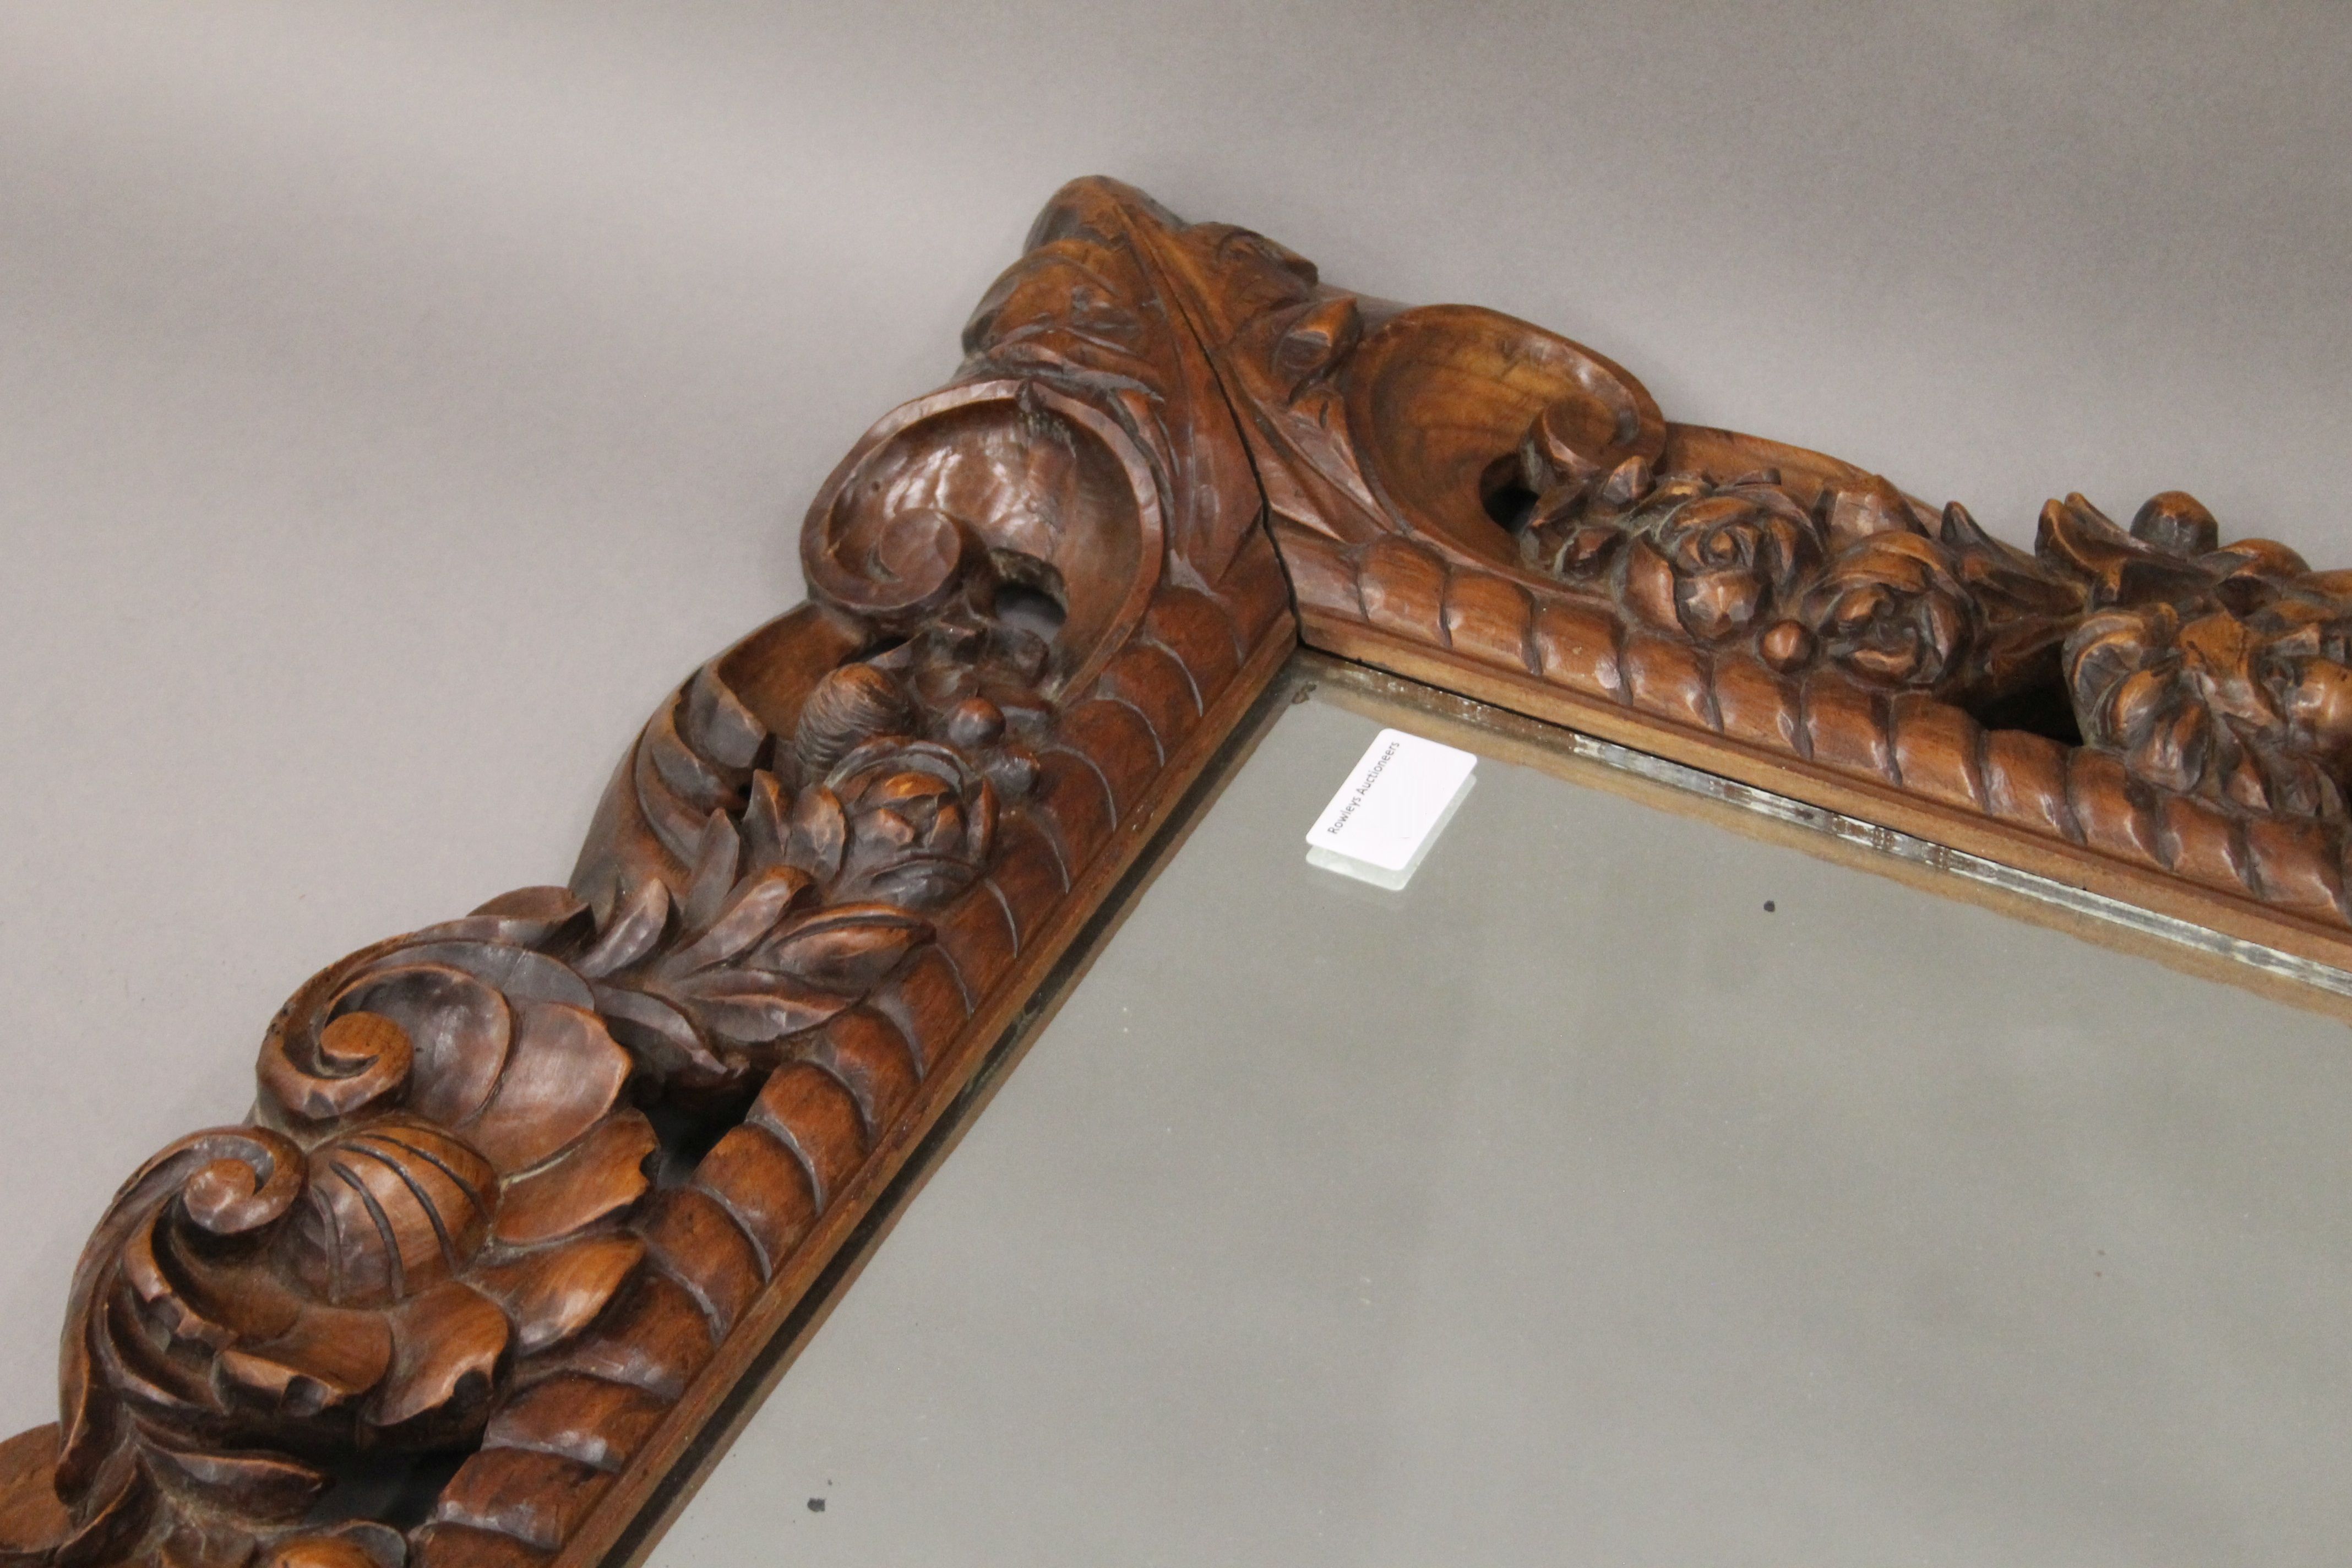 A 19th century carved walnut wall mirror decorated with putti, flowers, fruit and scroll work. - Image 2 of 3